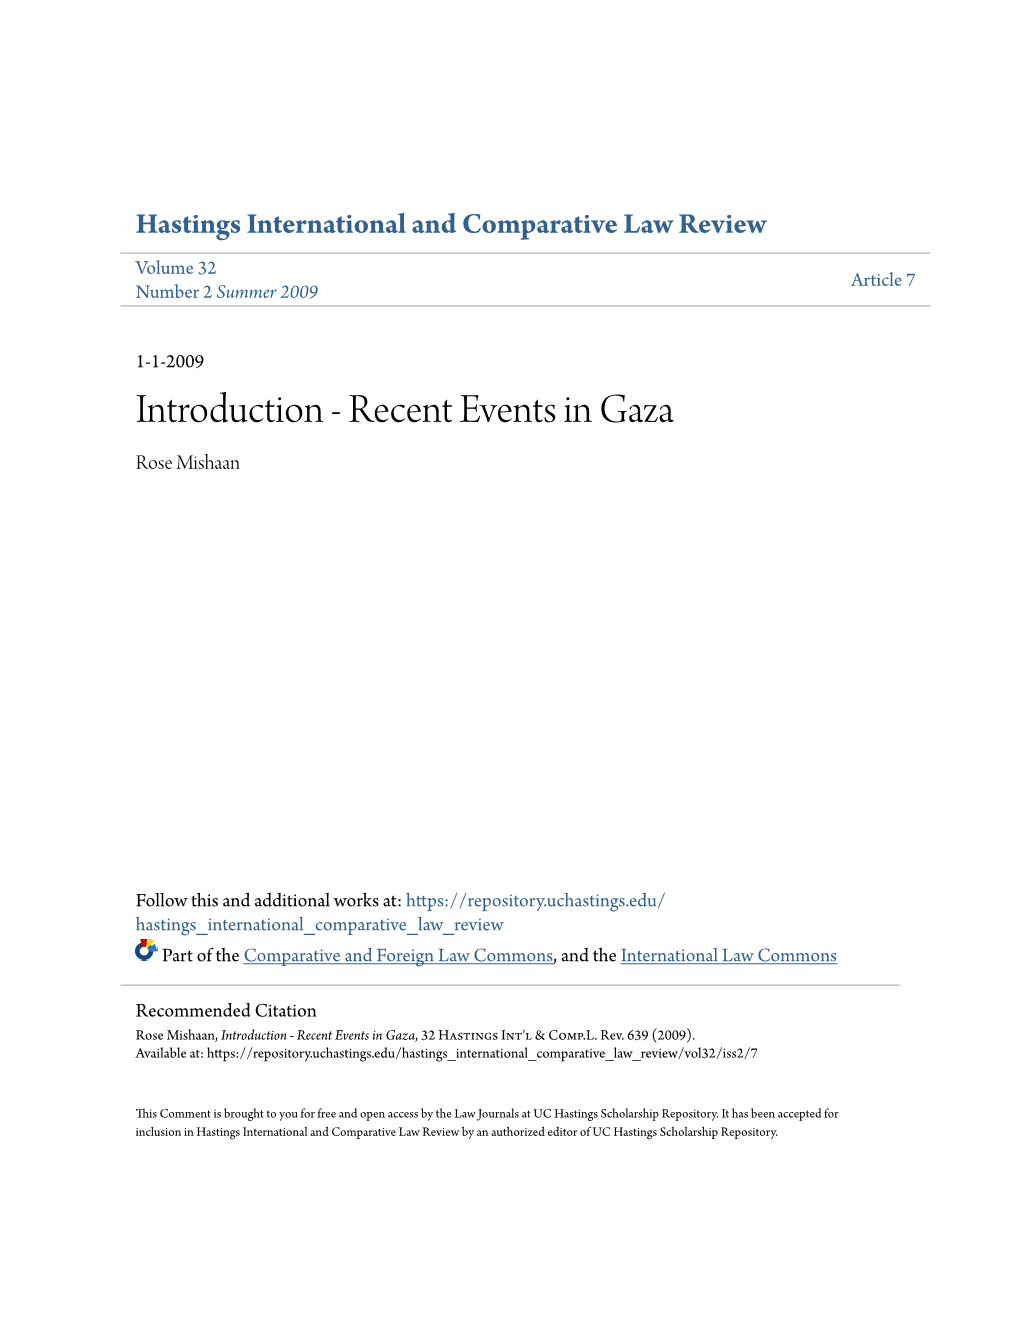 Introduction - Recent Events in Gaza Rose Mishaan